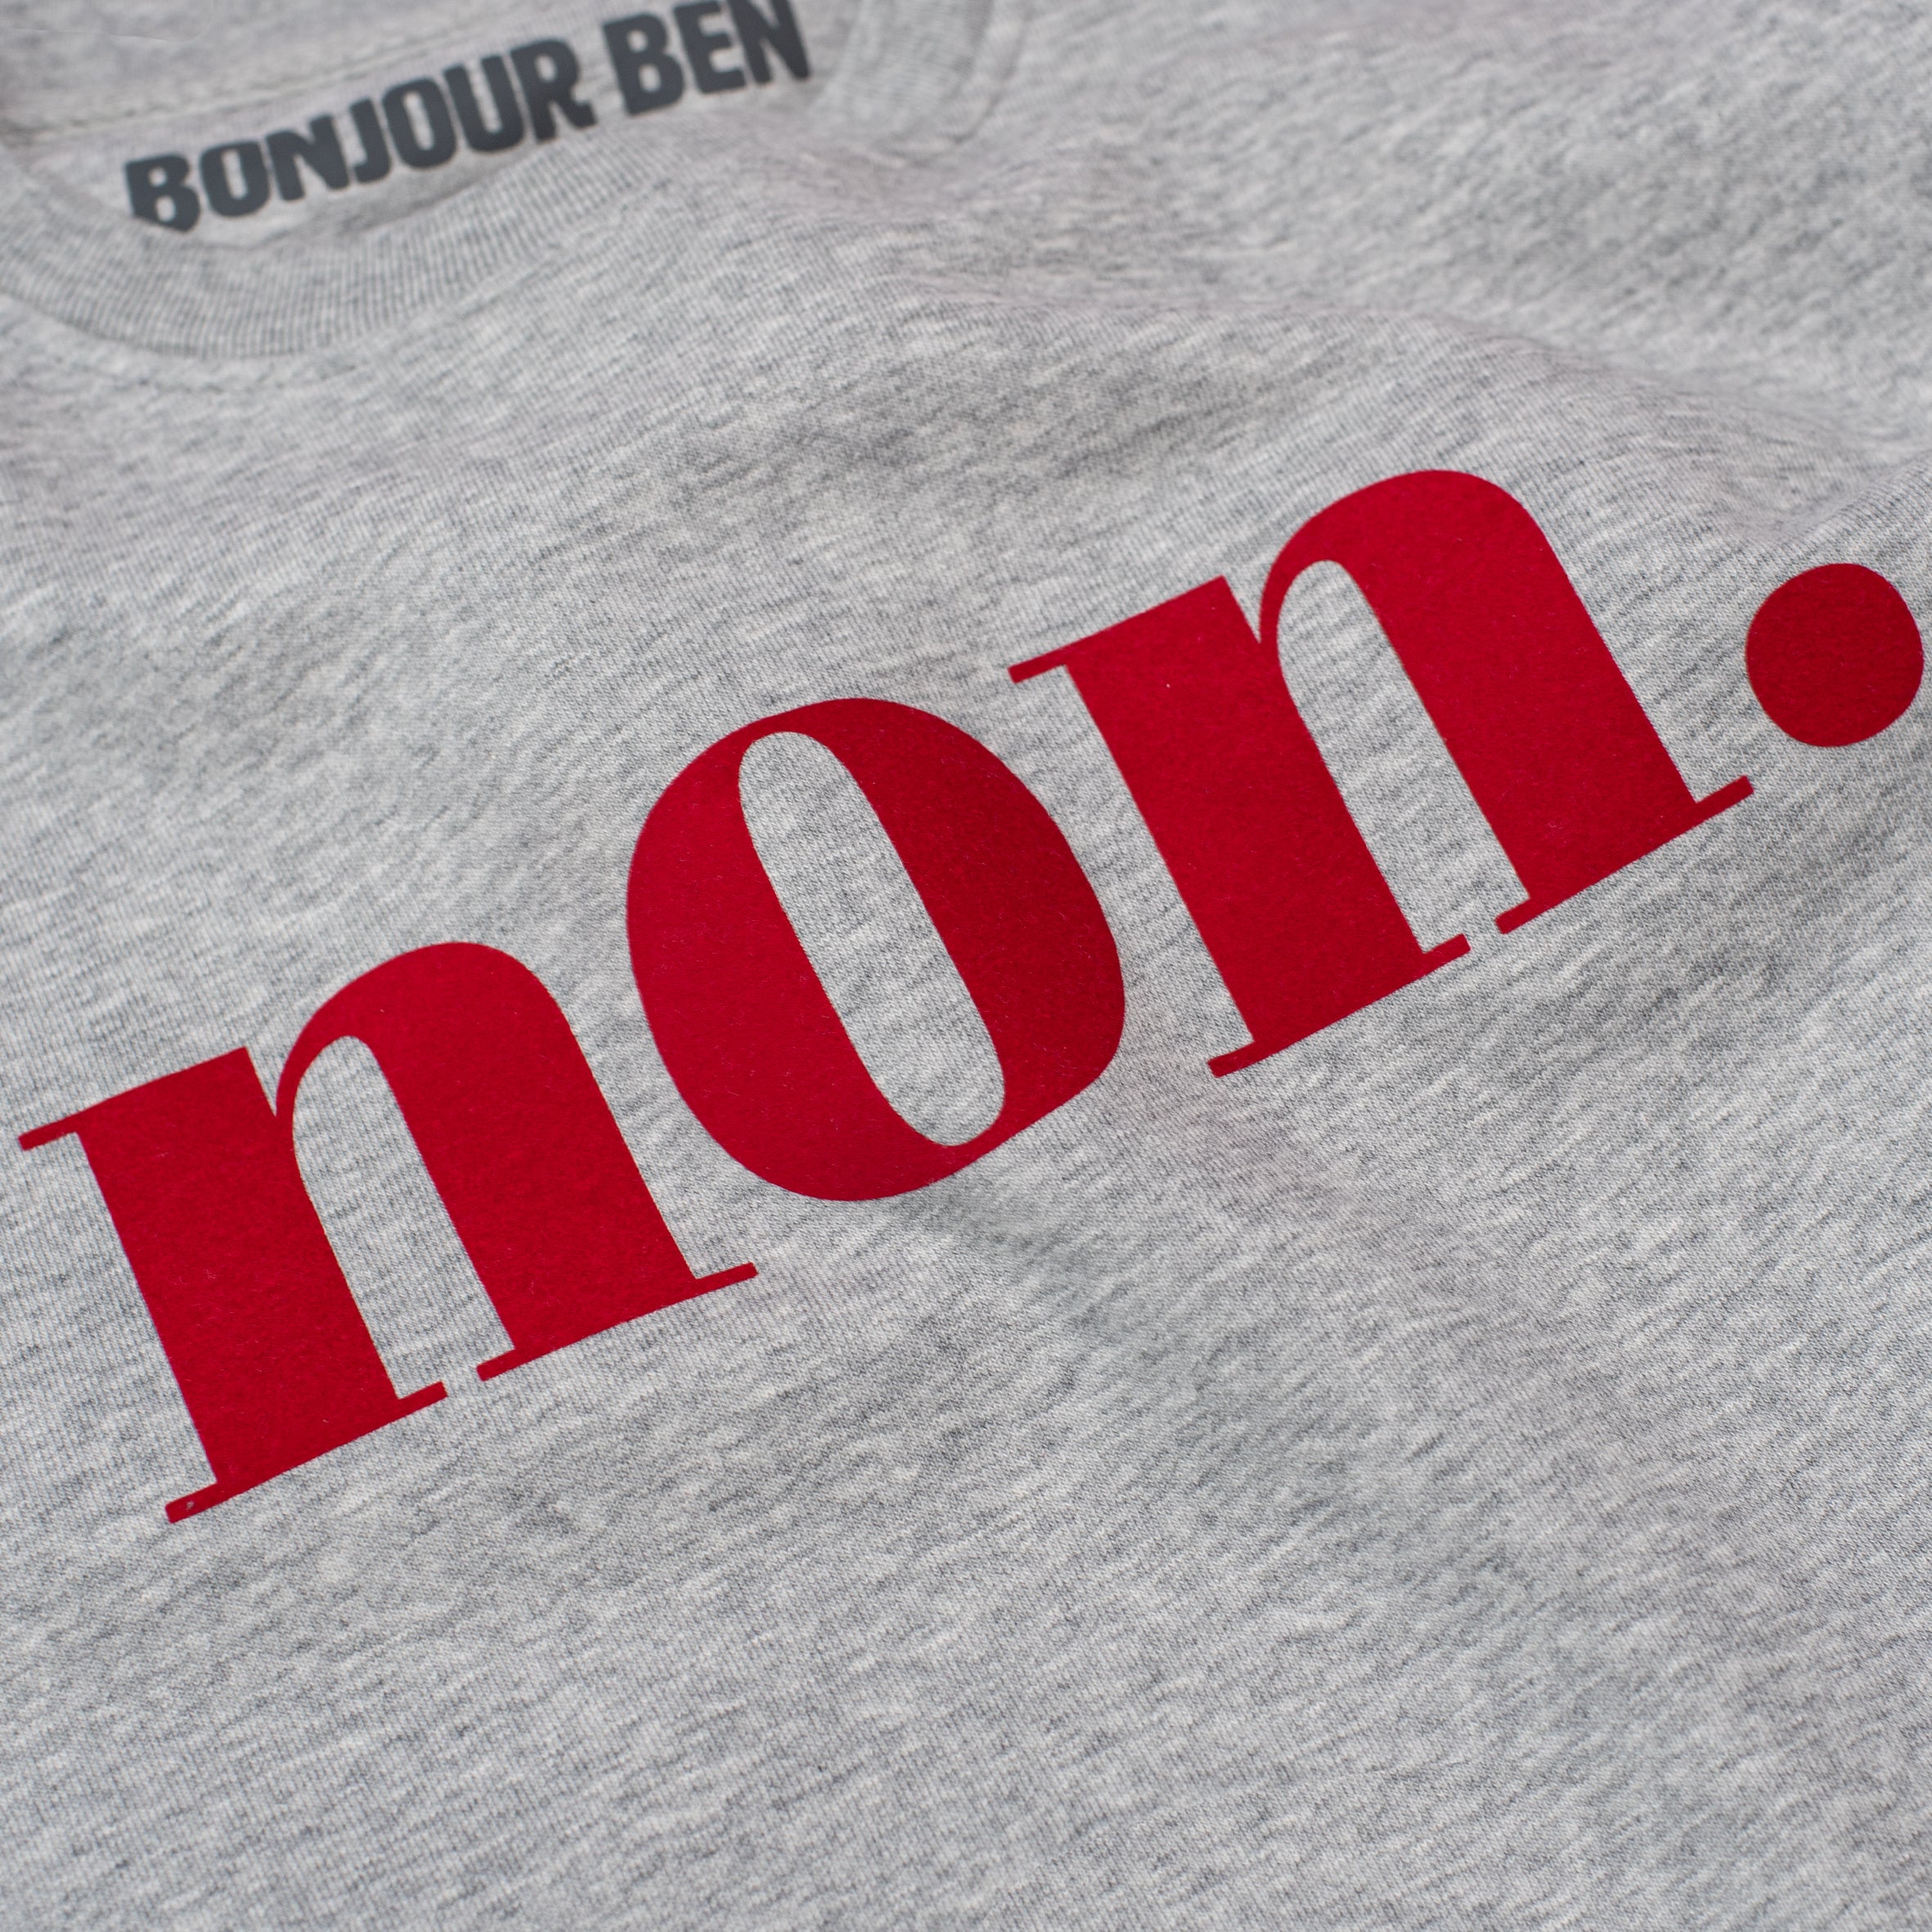 Non.  Sweater - Grey/Red